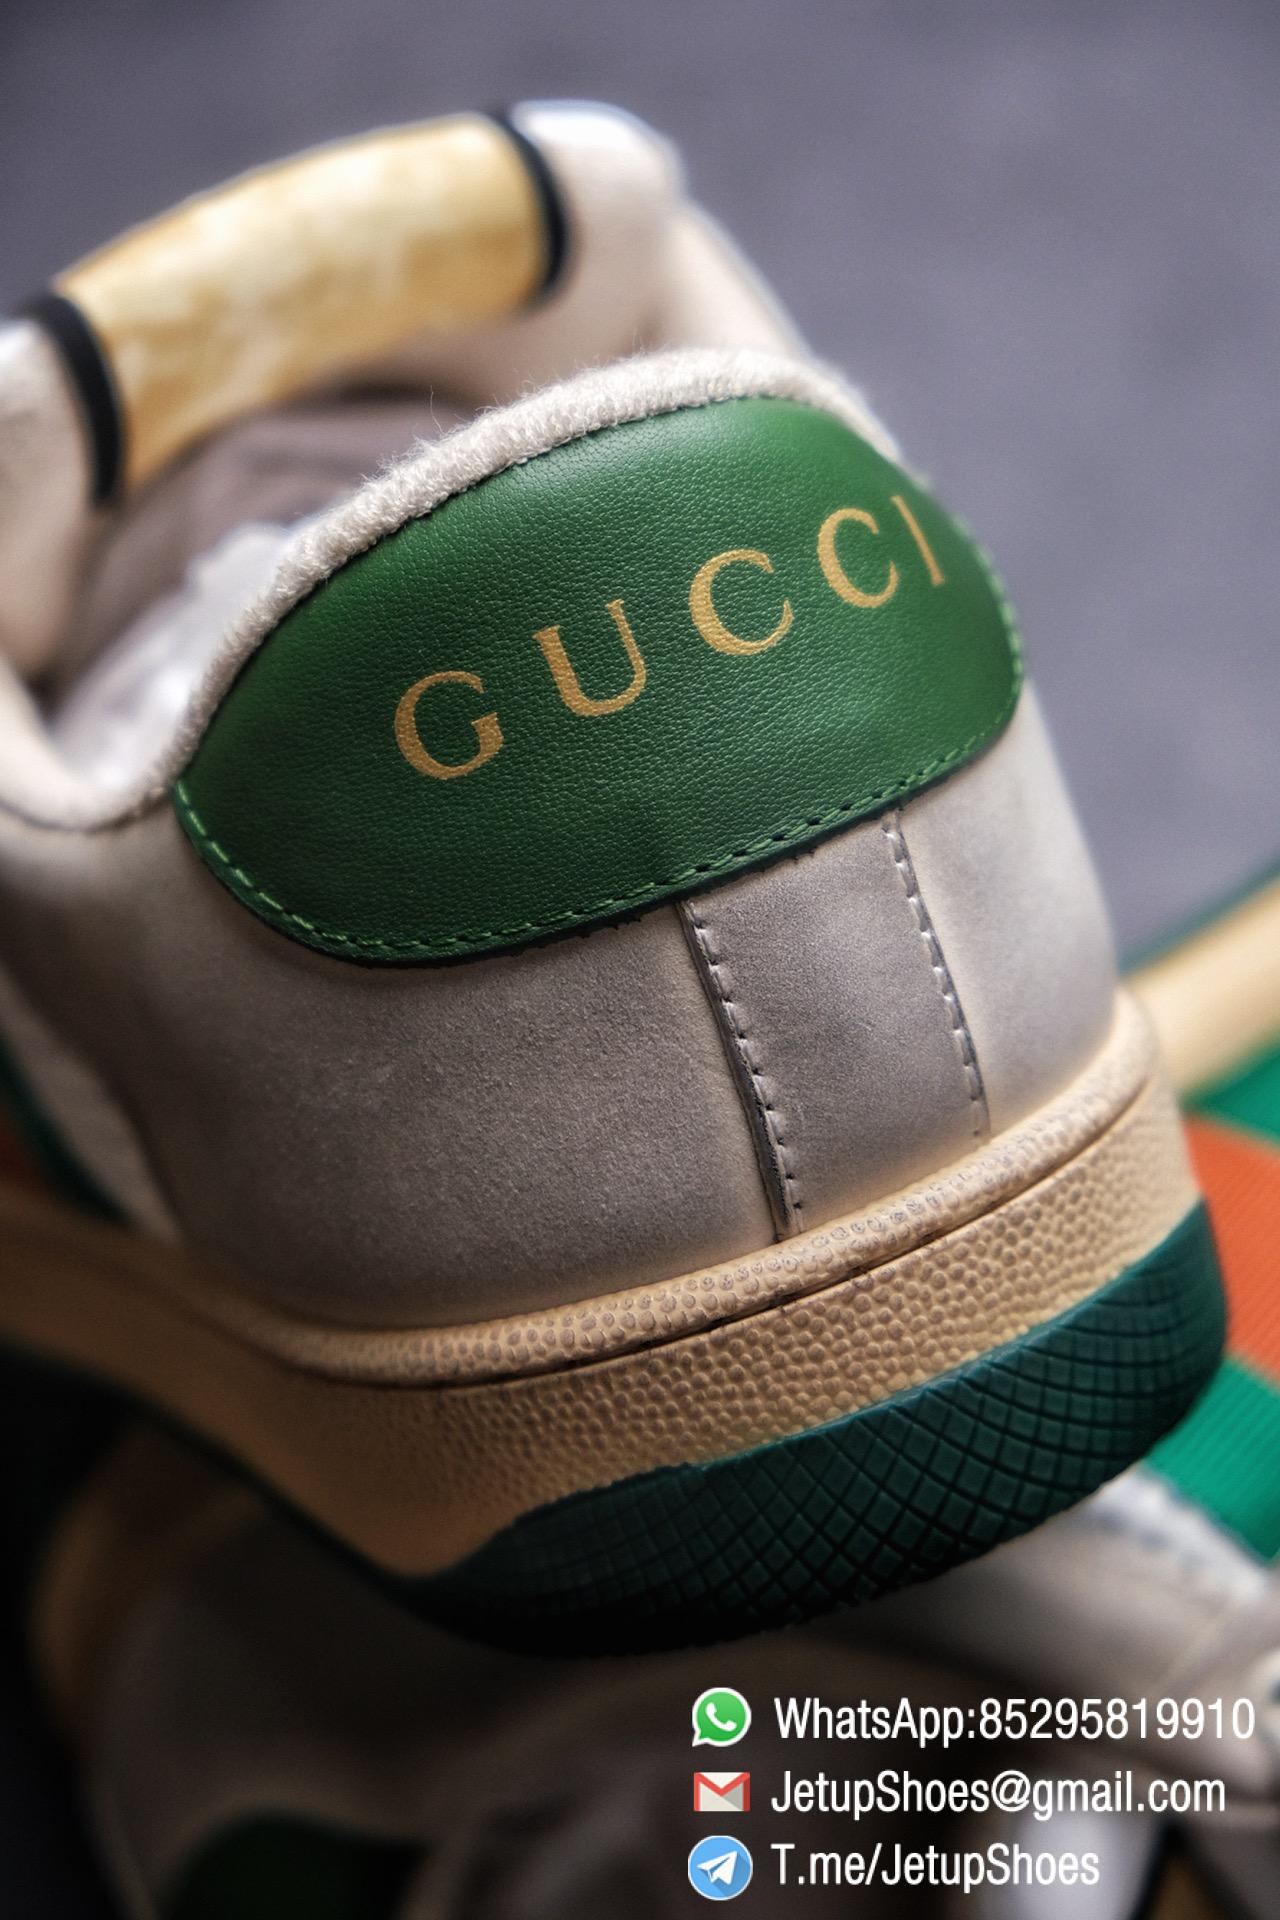 Gucci,Screener Leather Sneaker,Low-Top,Screener Leather Sneaker Low-Top Sneaker,Gucci Vintage Green and Orange Effect Sneakers